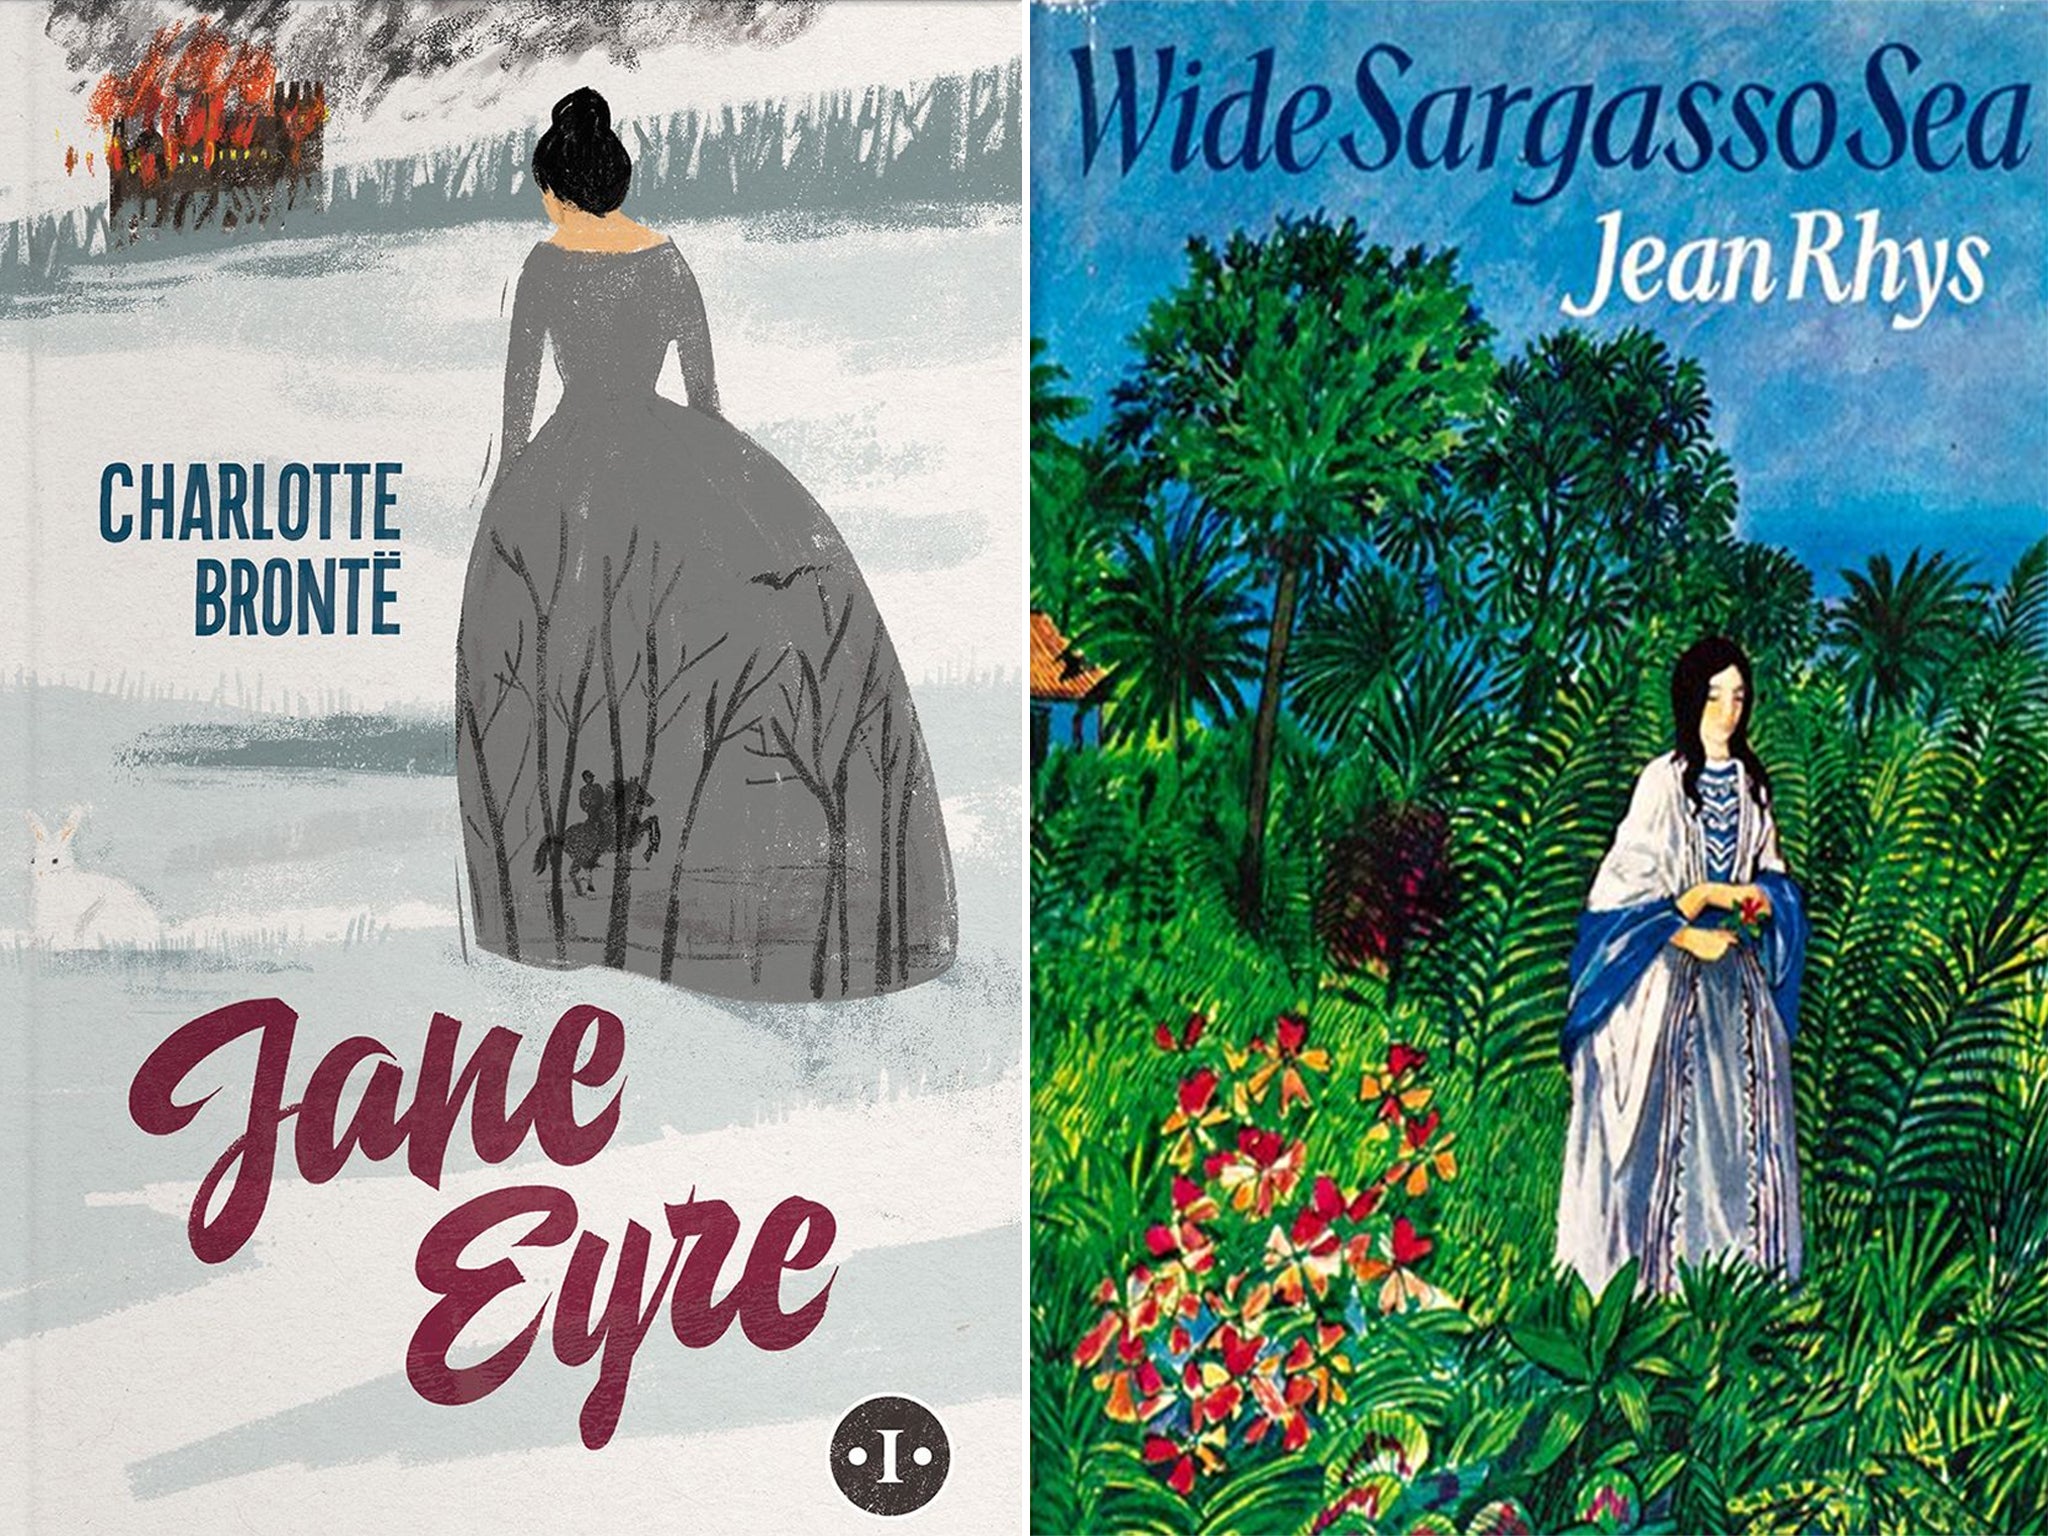 ‘Wide Sargasso Sea’ is the 1966 prequel to Charlotte Bronte’s 1847 ‘Jane Eyre'